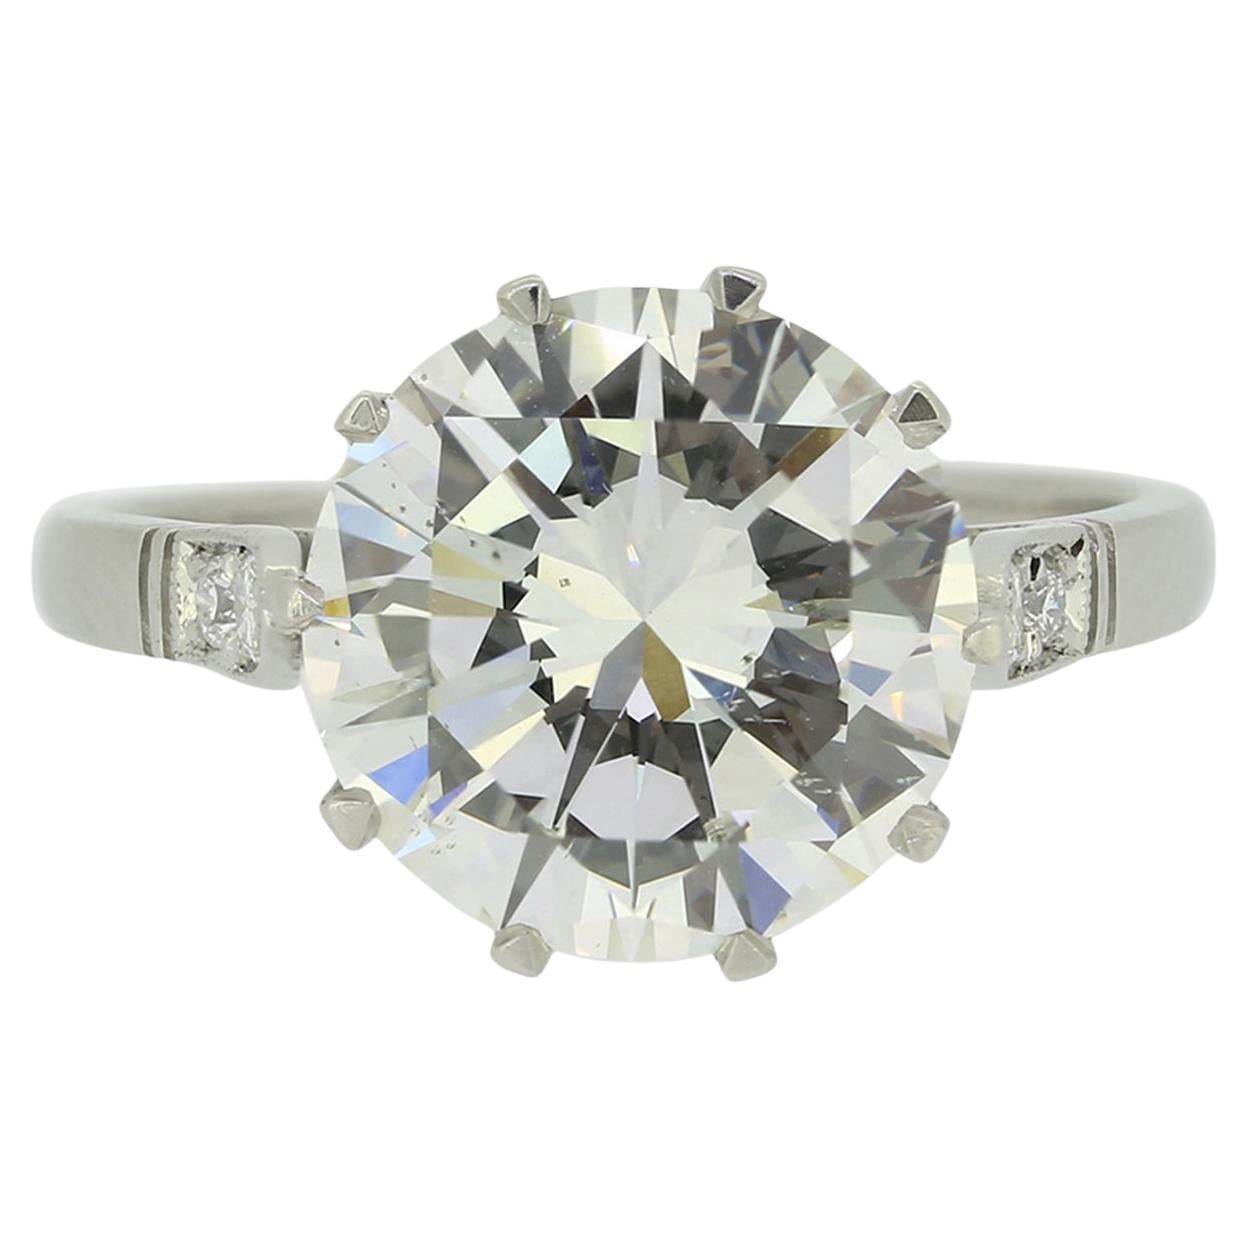 4.02 Carat Transitional Cut Diamond Solitaire Engagement Ring For Sale